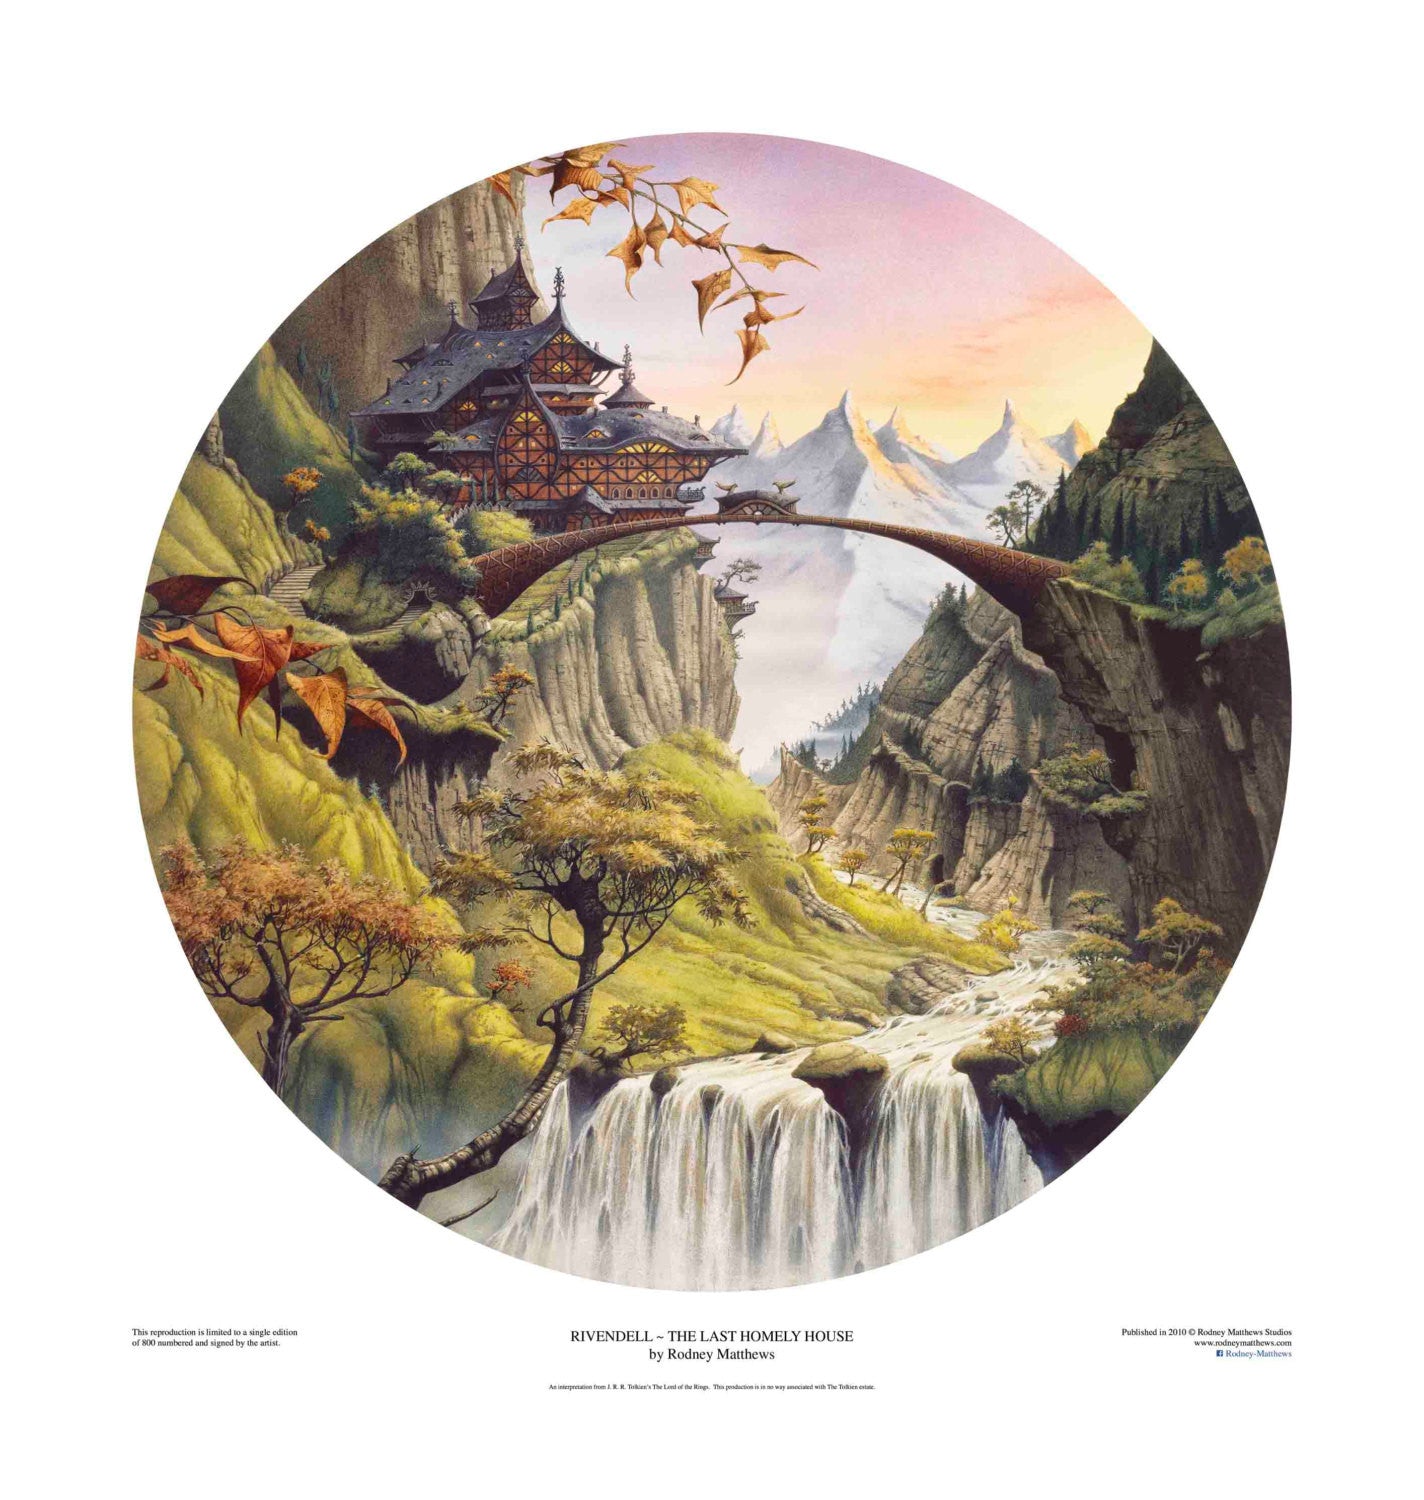 The Lord of the Rings: Rivendell ~ The Last Homely House limited edition giclèe art print